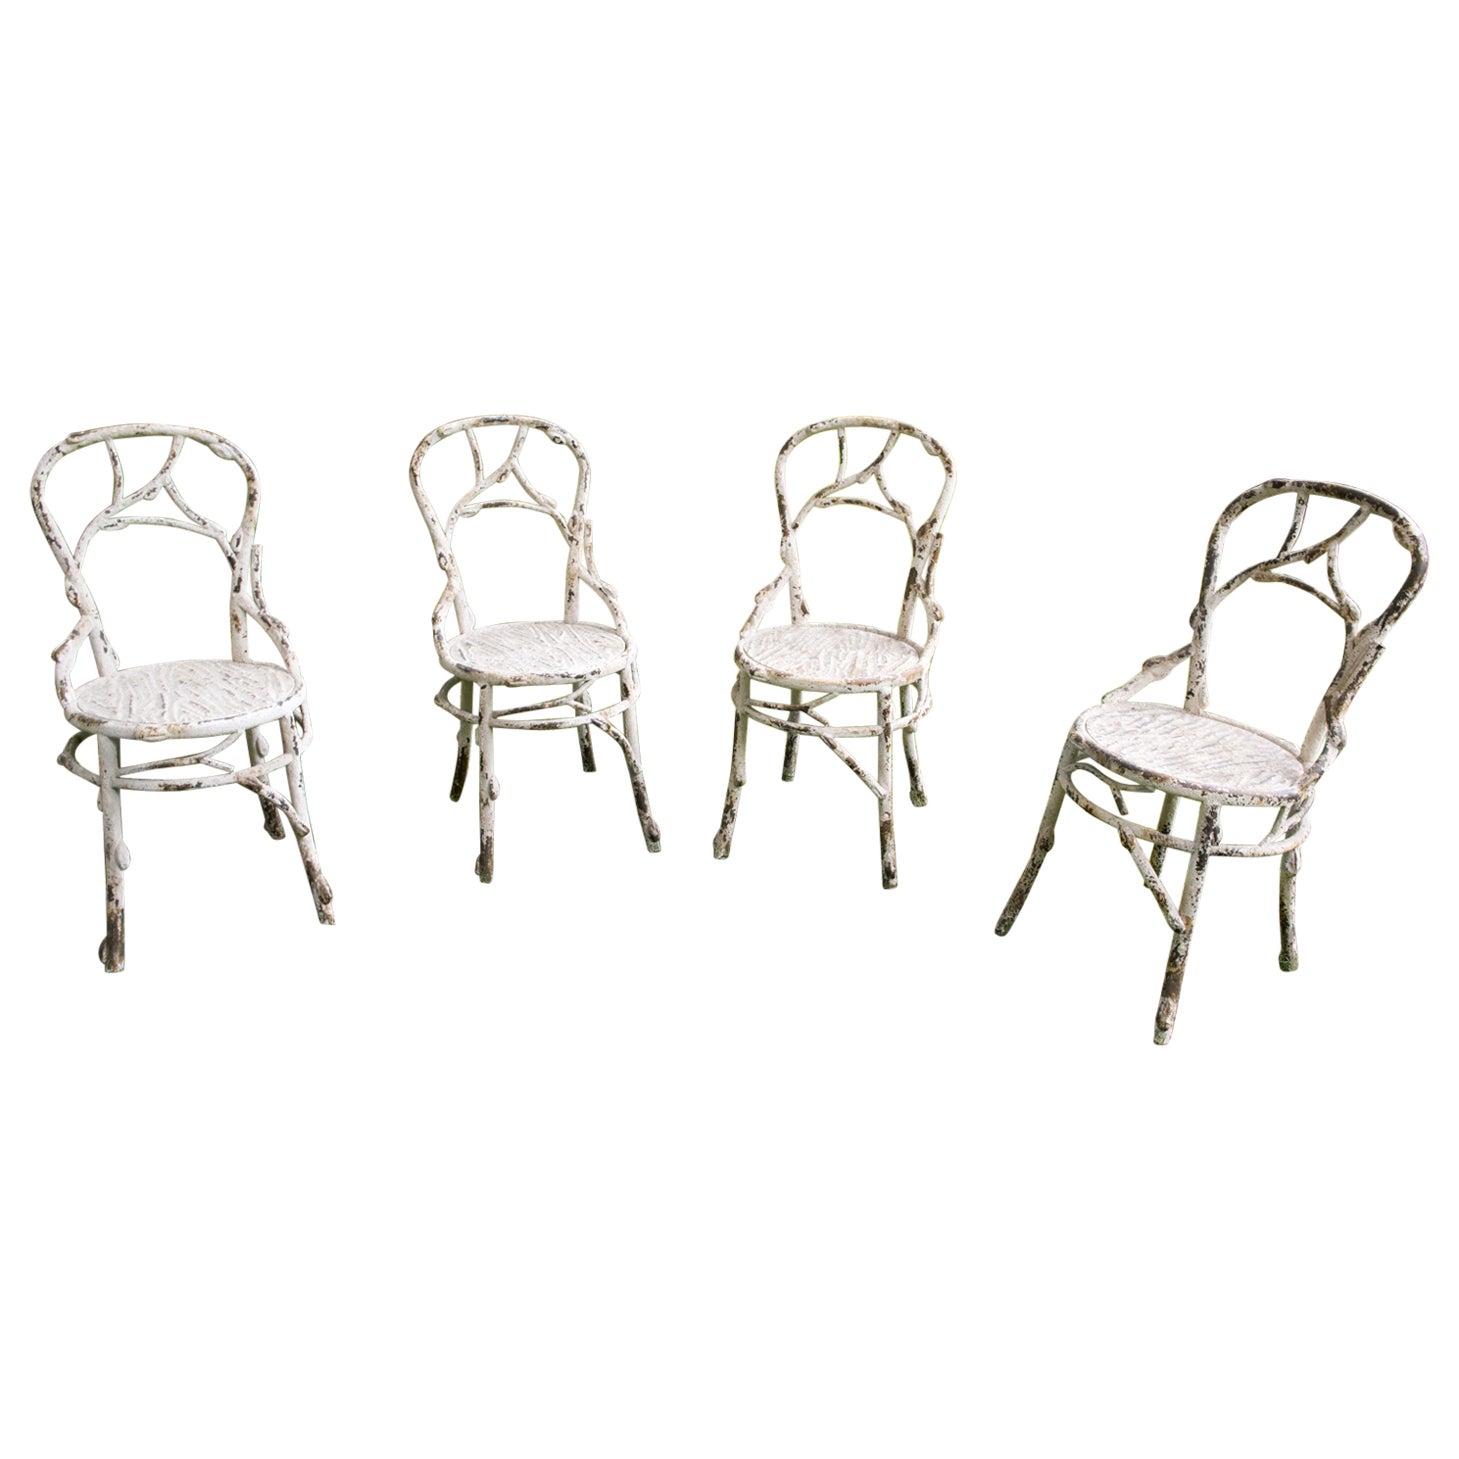 Set of 4 Faux Bois Metal Chairs